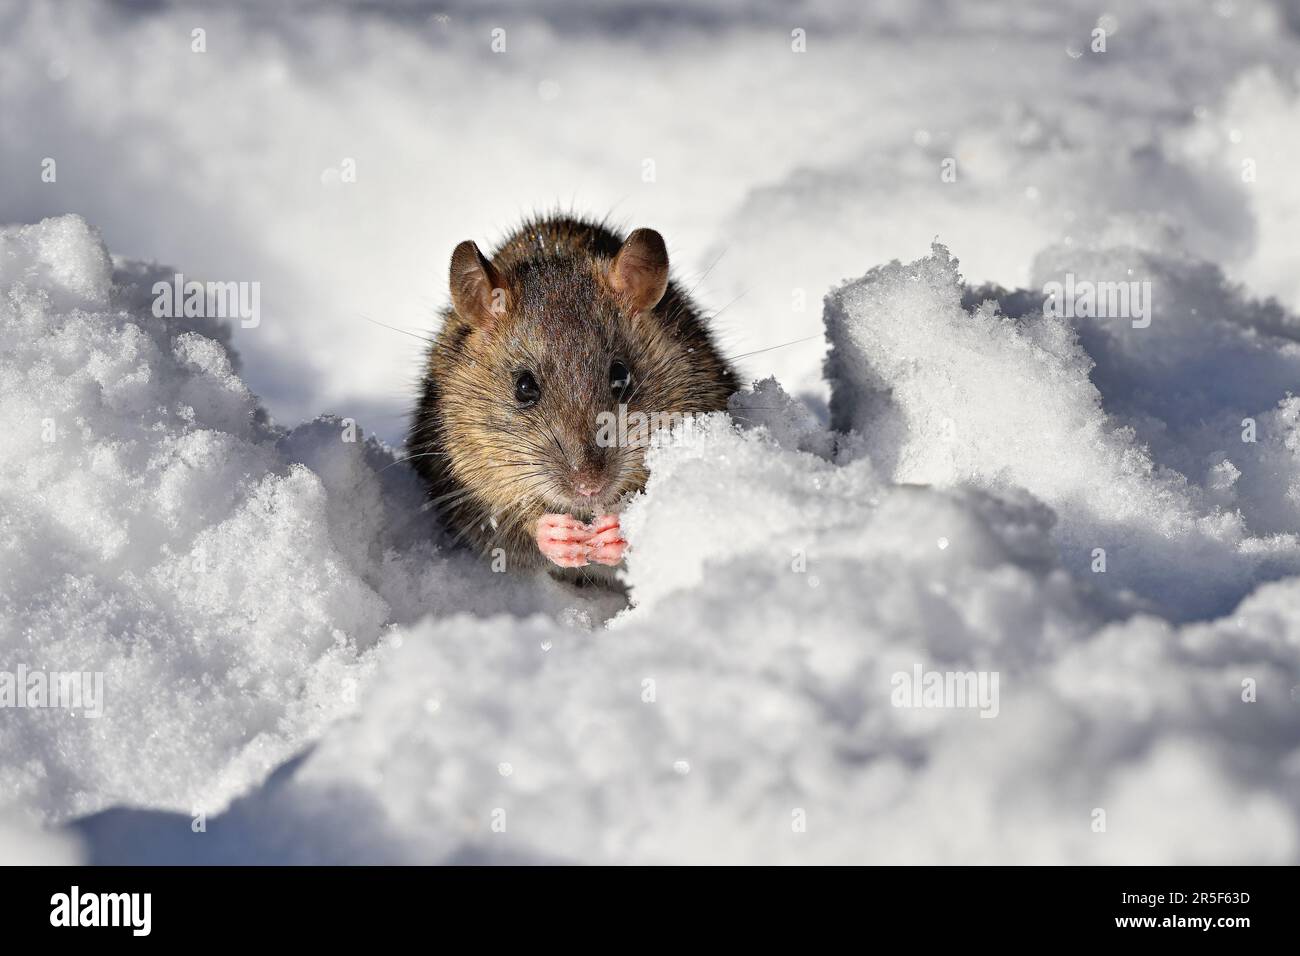 Rat on the snow in cold winter day. Stock Photo